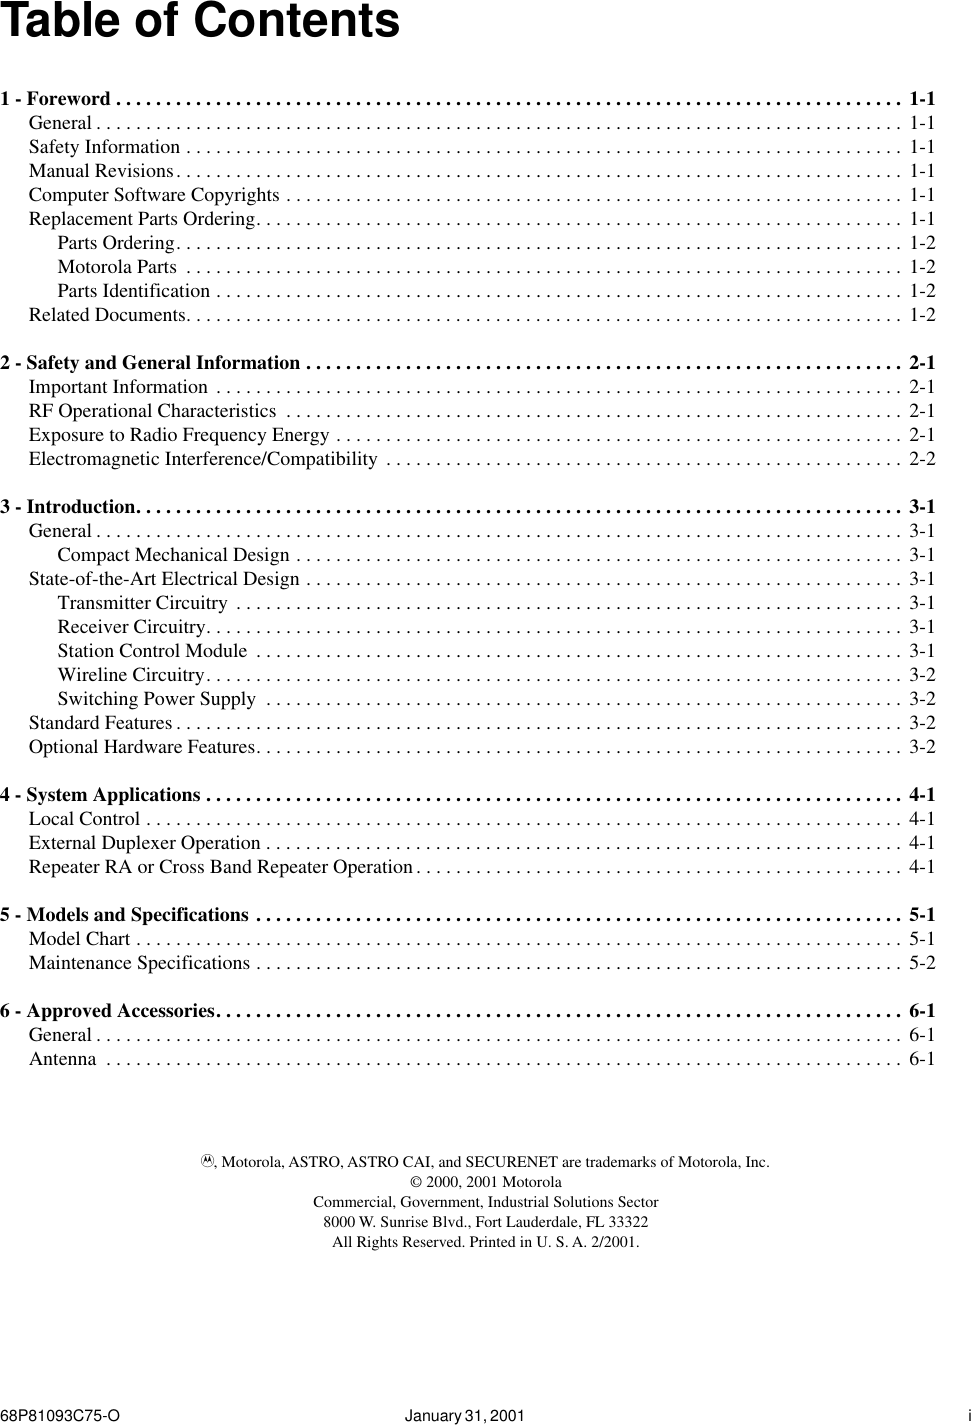  68P81093C75-O January 31, 2001  i Table of Contents 1 - Foreword . . . . . . . . . . . . . . . . . . . . . . . . . . . . . . . . . . . . . . . . . . . . . . . . . . . . . . . . . . . . . . . . . . . . . . . . . . . . . . .  1-1 General . . . . . . . . . . . . . . . . . . . . . . . . . . . . . . . . . . . . . . . . . . . . . . . . . . . . . . . . . . . . . . . . . . . . . . . . . . . . . . . . .  1-1Safety Information . . . . . . . . . . . . . . . . . . . . . . . . . . . . . . . . . . . . . . . . . . . . . . . . . . . . . . . . . . . . . . . . . . . . . . . .  1-1Manual Revisions. . . . . . . . . . . . . . . . . . . . . . . . . . . . . . . . . . . . . . . . . . . . . . . . . . . . . . . . . . . . . . . . . . . . . . . . .  1-1Computer Software Copyrights . . . . . . . . . . . . . . . . . . . . . . . . . . . . . . . . . . . . . . . . . . . . . . . . . . . . . . . . . . . . . .  1-1Replacement Parts Ordering. . . . . . . . . . . . . . . . . . . . . . . . . . . . . . . . . . . . . . . . . . . . . . . . . . . . . . . . . . . . . . . . .  1-1Parts Ordering. . . . . . . . . . . . . . . . . . . . . . . . . . . . . . . . . . . . . . . . . . . . . . . . . . . . . . . . . . . . . . . . . . . . . . . . .  1-2Motorola Parts  . . . . . . . . . . . . . . . . . . . . . . . . . . . . . . . . . . . . . . . . . . . . . . . . . . . . . . . . . . . . . . . . . . . . . . . .  1-2Parts Identification . . . . . . . . . . . . . . . . . . . . . . . . . . . . . . . . . . . . . . . . . . . . . . . . . . . . . . . . . . . . . . . . . . . . .  1-2Related Documents. . . . . . . . . . . . . . . . . . . . . . . . . . . . . . . . . . . . . . . . . . . . . . . . . . . . . . . . . . . . . . . . . . . . . . . .  1-2 2 - Safety and General Information . . . . . . . . . . . . . . . . . . . . . . . . . . . . . . . . . . . . . . . . . . . . . . . . . . . . . . . . . . . .  2-1 Important Information . . . . . . . . . . . . . . . . . . . . . . . . . . . . . . . . . . . . . . . . . . . . . . . . . . . . . . . . . . . . . . . . . . . . . 2-1RF Operational Characteristics  . . . . . . . . . . . . . . . . . . . . . . . . . . . . . . . . . . . . . . . . . . . . . . . . . . . . . . . . . . . . . . 2-1Exposure to Radio Frequency Energy . . . . . . . . . . . . . . . . . . . . . . . . . . . . . . . . . . . . . . . . . . . . . . . . . . . . . . . . .  2-1Electromagnetic Interference/Compatibility . . . . . . . . . . . . . . . . . . . . . . . . . . . . . . . . . . . . . . . . . . . . . . . . . . . . 2-2 3 - Introduction. . . . . . . . . . . . . . . . . . . . . . . . . . . . . . . . . . . . . . . . . . . . . . . . . . . . . . . . . . . . . . . . . . . . . . . . . . . . .  3-1 General . . . . . . . . . . . . . . . . . . . . . . . . . . . . . . . . . . . . . . . . . . . . . . . . . . . . . . . . . . . . . . . . . . . . . . . . . . . . . . . . .  3-1Compact Mechanical Design . . . . . . . . . . . . . . . . . . . . . . . . . . . . . . . . . . . . . . . . . . . . . . . . . . . . . . . . . . . . .  3-1State-of-the-Art Electrical Design . . . . . . . . . . . . . . . . . . . . . . . . . . . . . . . . . . . . . . . . . . . . . . . . . . . . . . . . . . . .  3-1Transmitter Circuitry . . . . . . . . . . . . . . . . . . . . . . . . . . . . . . . . . . . . . . . . . . . . . . . . . . . . . . . . . . . . . . . . . . . 3-1Receiver Circuitry. . . . . . . . . . . . . . . . . . . . . . . . . . . . . . . . . . . . . . . . . . . . . . . . . . . . . . . . . . . . . . . . . . . . . .  3-1Station Control Module  . . . . . . . . . . . . . . . . . . . . . . . . . . . . . . . . . . . . . . . . . . . . . . . . . . . . . . . . . . . . . . . . .  3-1Wireline Circuitry. . . . . . . . . . . . . . . . . . . . . . . . . . . . . . . . . . . . . . . . . . . . . . . . . . . . . . . . . . . . . . . . . . . . . .  3-2Switching Power Supply  . . . . . . . . . . . . . . . . . . . . . . . . . . . . . . . . . . . . . . . . . . . . . . . . . . . . . . . . . . . . . . . . 3-2Standard Features . . . . . . . . . . . . . . . . . . . . . . . . . . . . . . . . . . . . . . . . . . . . . . . . . . . . . . . . . . . . . . . . . . . . . . . . .  3-2Optional Hardware Features. . . . . . . . . . . . . . . . . . . . . . . . . . . . . . . . . . . . . . . . . . . . . . . . . . . . . . . . . . . . . . . . .  3-2 4 - System Applications . . . . . . . . . . . . . . . . . . . . . . . . . . . . . . . . . . . . . . . . . . . . . . . . . . . . . . . . . . . . . . . . . . . . . .  4-1 Local Control . . . . . . . . . . . . . . . . . . . . . . . . . . . . . . . . . . . . . . . . . . . . . . . . . . . . . . . . . . . . . . . . . . . . . . . . . . . .  4-1External Duplexer Operation . . . . . . . . . . . . . . . . . . . . . . . . . . . . . . . . . . . . . . . . . . . . . . . . . . . . . . . . . . . . . . . .  4-1Repeater RA or Cross Band Repeater Operation. . . . . . . . . . . . . . . . . . . . . . . . . . . . . . . . . . . . . . . . . . . . . . . . . 4-1 5 - Models and Specifications . . . . . . . . . . . . . . . . . . . . . . . . . . . . . . . . . . . . . . . . . . . . . . . . . . . . . . . . . . . . . . . . .  5-1 Model Chart . . . . . . . . . . . . . . . . . . . . . . . . . . . . . . . . . . . . . . . . . . . . . . . . . . . . . . . . . . . . . . . . . . . . . . . . . . . . .  5-1Maintenance Specifications . . . . . . . . . . . . . . . . . . . . . . . . . . . . . . . . . . . . . . . . . . . . . . . . . . . . . . . . . . . . . . . . .  5-2 6 - Approved Accessories. . . . . . . . . . . . . . . . . . . . . . . . . . . . . . . . . . . . . . . . . . . . . . . . . . . . . . . . . . . . . . . . . . . . .  6-1 General . . . . . . . . . . . . . . . . . . . . . . . . . . . . . . . . . . . . . . . . . . . . . . . . . . . . . . . . . . . . . . . . . . . . . . . . . . . . . . . . .  6-1Antenna  . . . . . . . . . . . . . . . . . . . . . . . . . . . . . . . . . . . . . . . . . . . . . . . . . . . . . . . . . . . . . . . . . . . . . . . . . . . . . . . .  6-1 A , Motorola, ASTRO, ASTRO CAI, and SECURENET are trademarks of Motorola, Inc.© 2000, 2001 MotorolaCommercial, Government, Industrial Solutions Sector8000 W. Sunrise Blvd., Fort Lauderdale, FL 33322All Rights Reserved. Printed in U. S. A. 2/2001. 